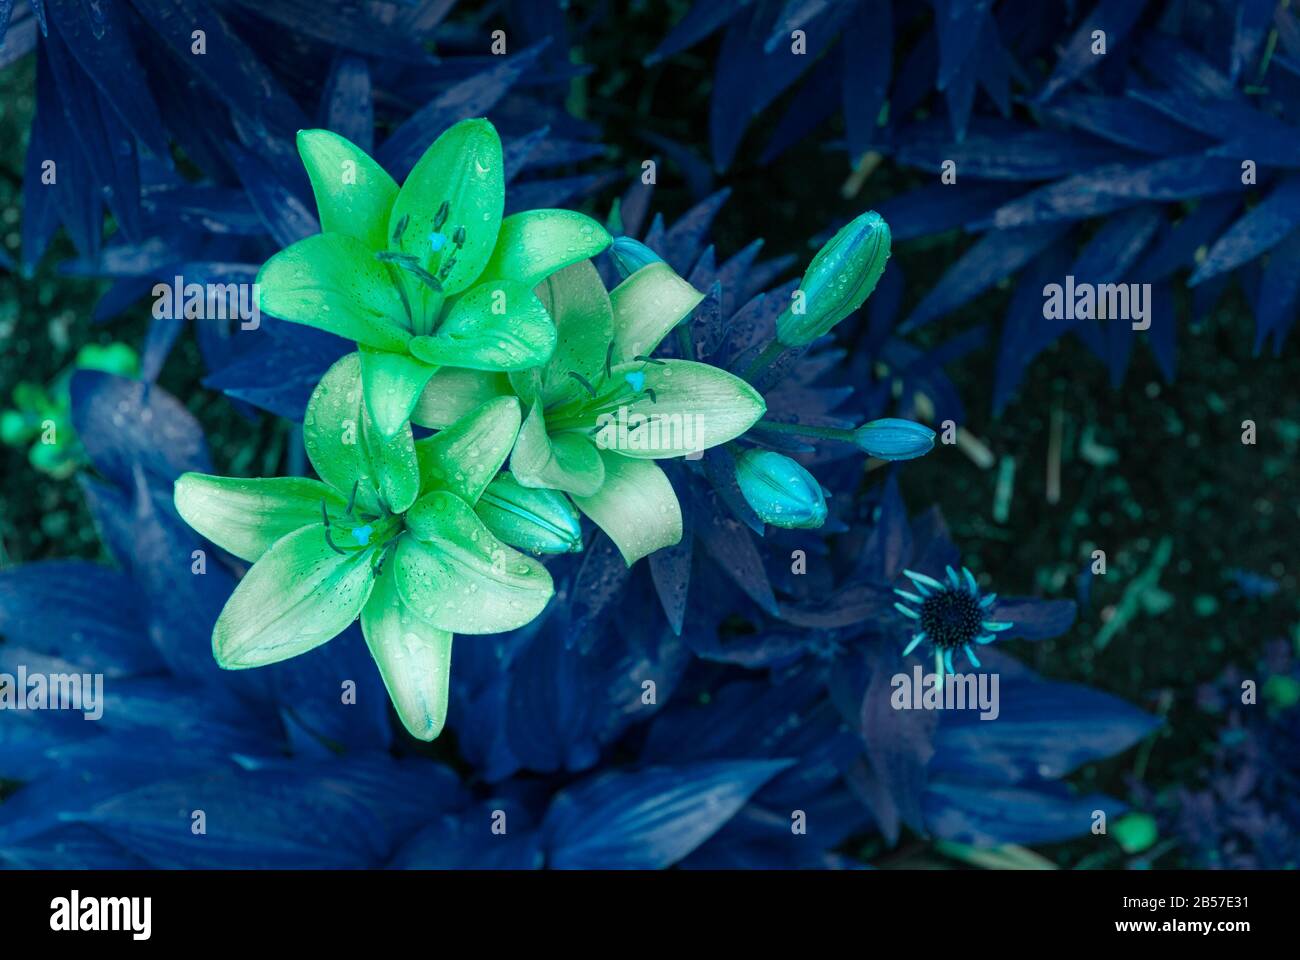 Group of Lilies with pantone blue shading Stock Photo